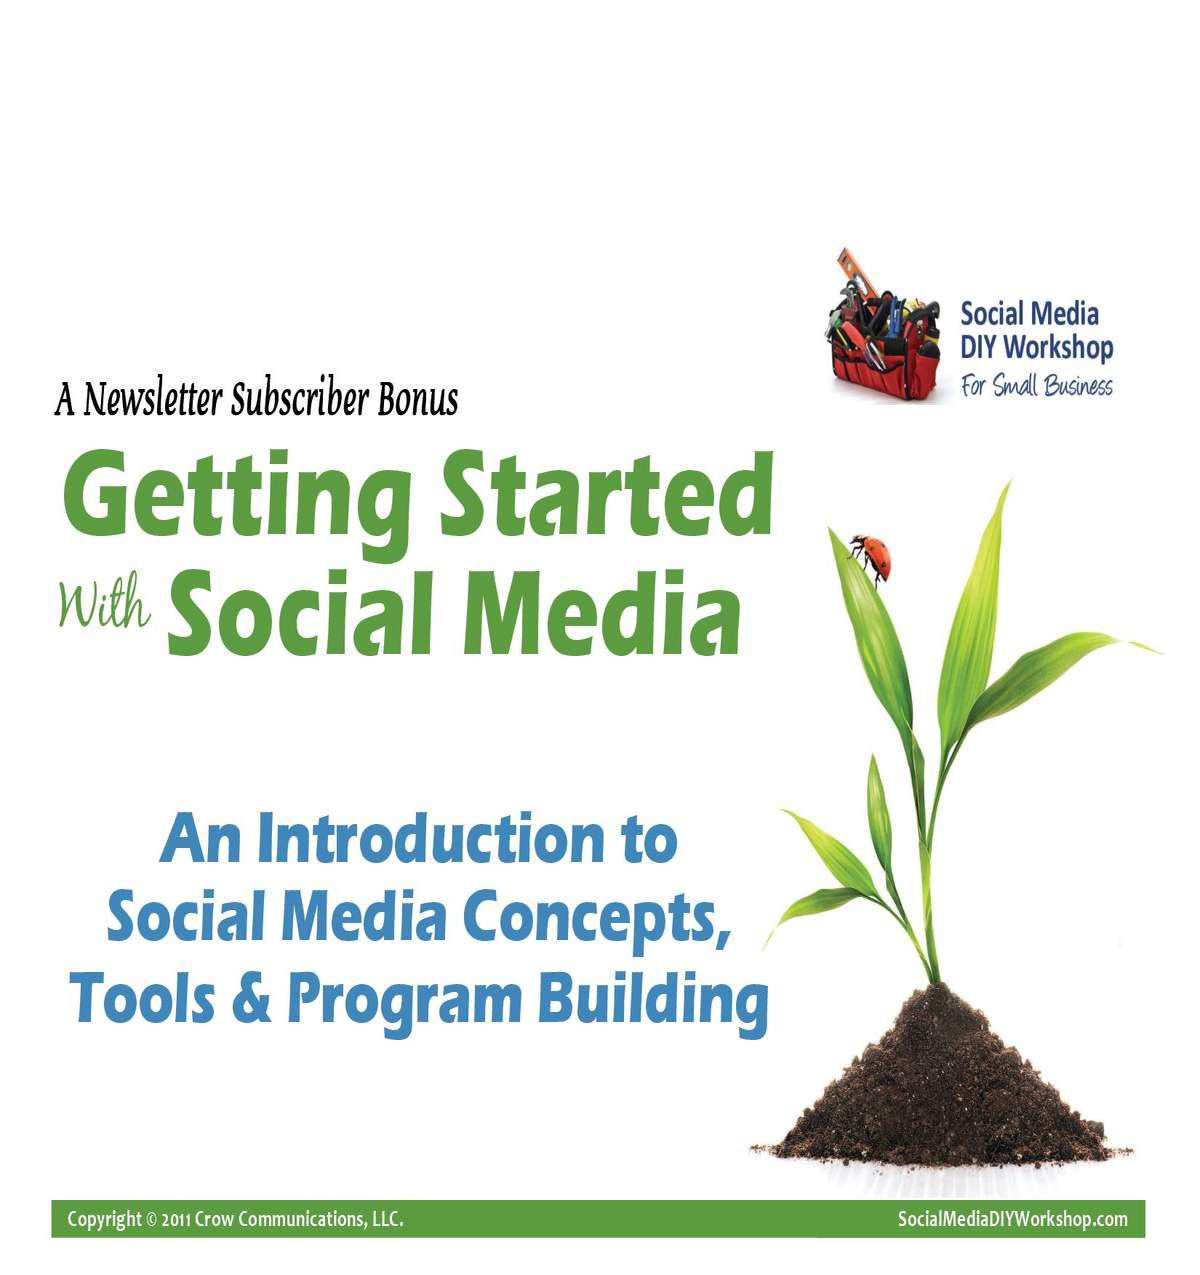 Getting Started with Social Media